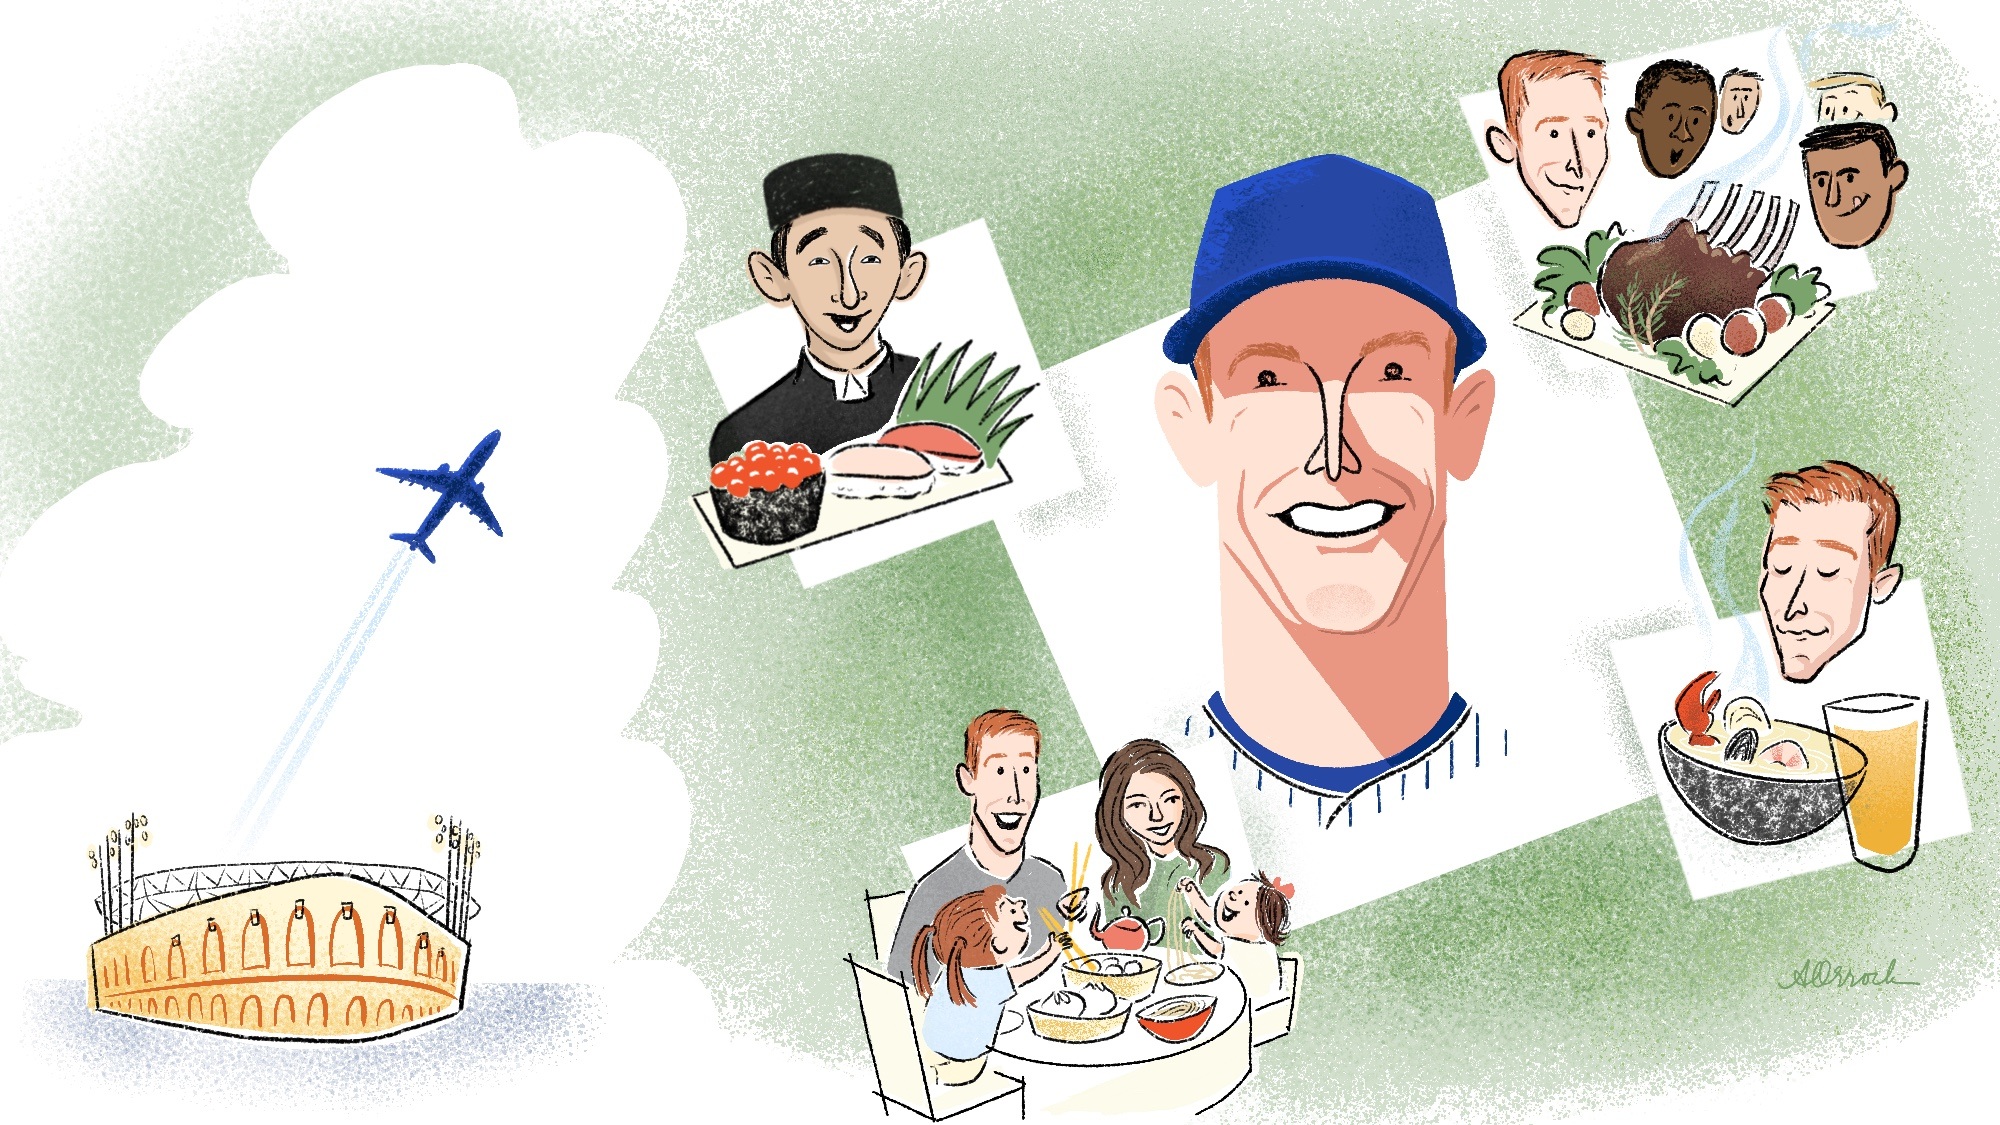 An illustration of Mark Canha with some of his favorite restaurant memories.